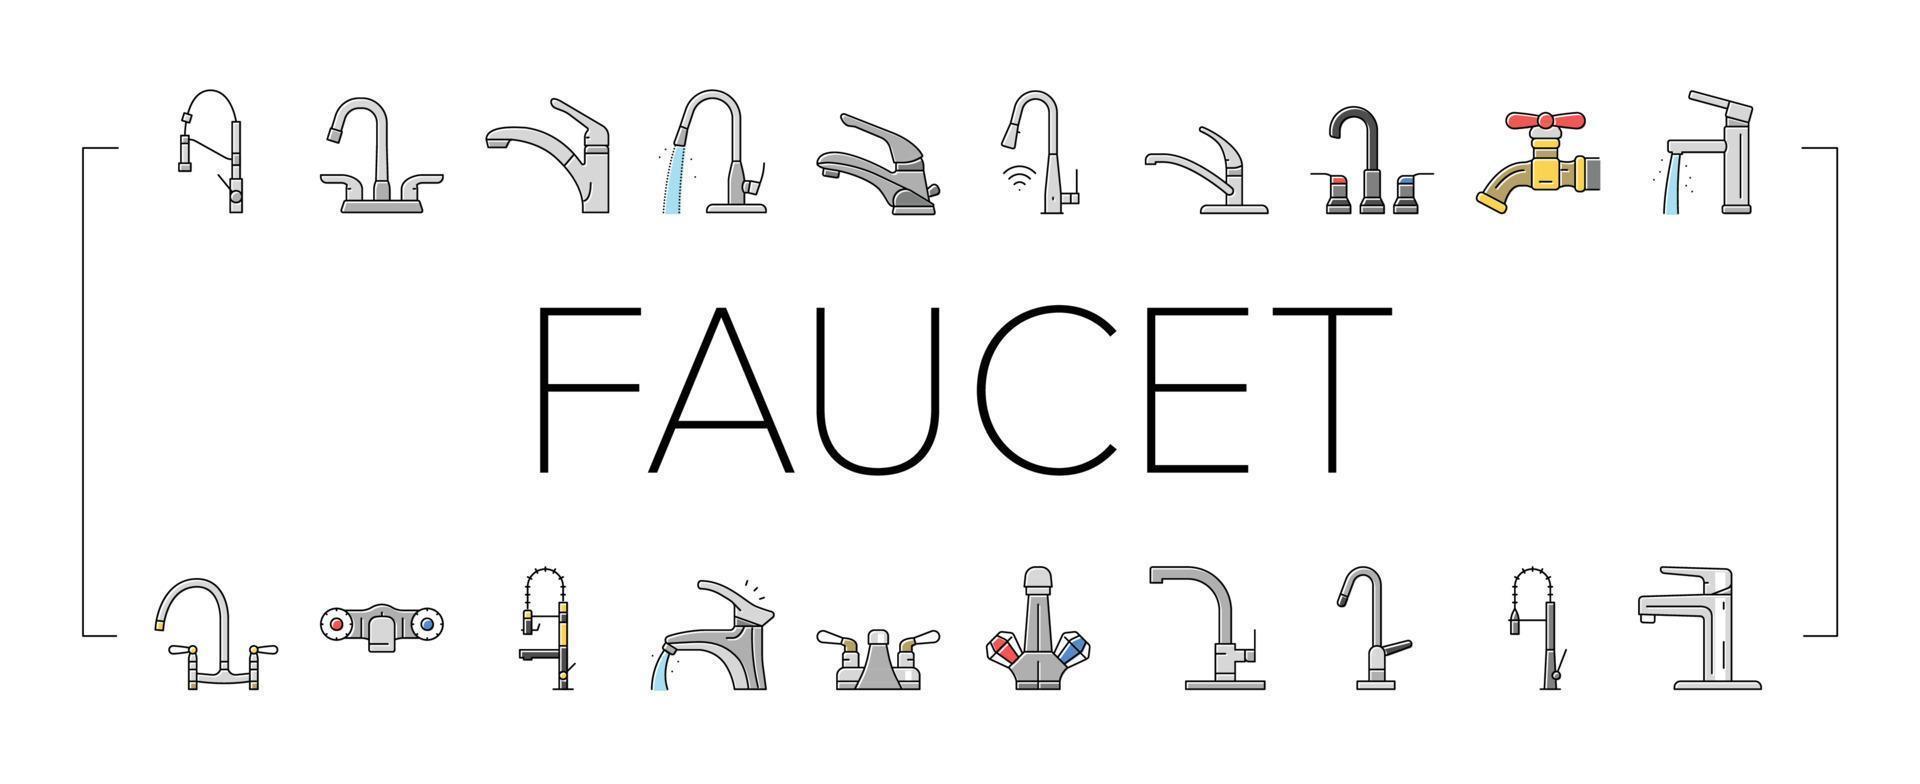 faucet water sink tap bathroom icons set vector